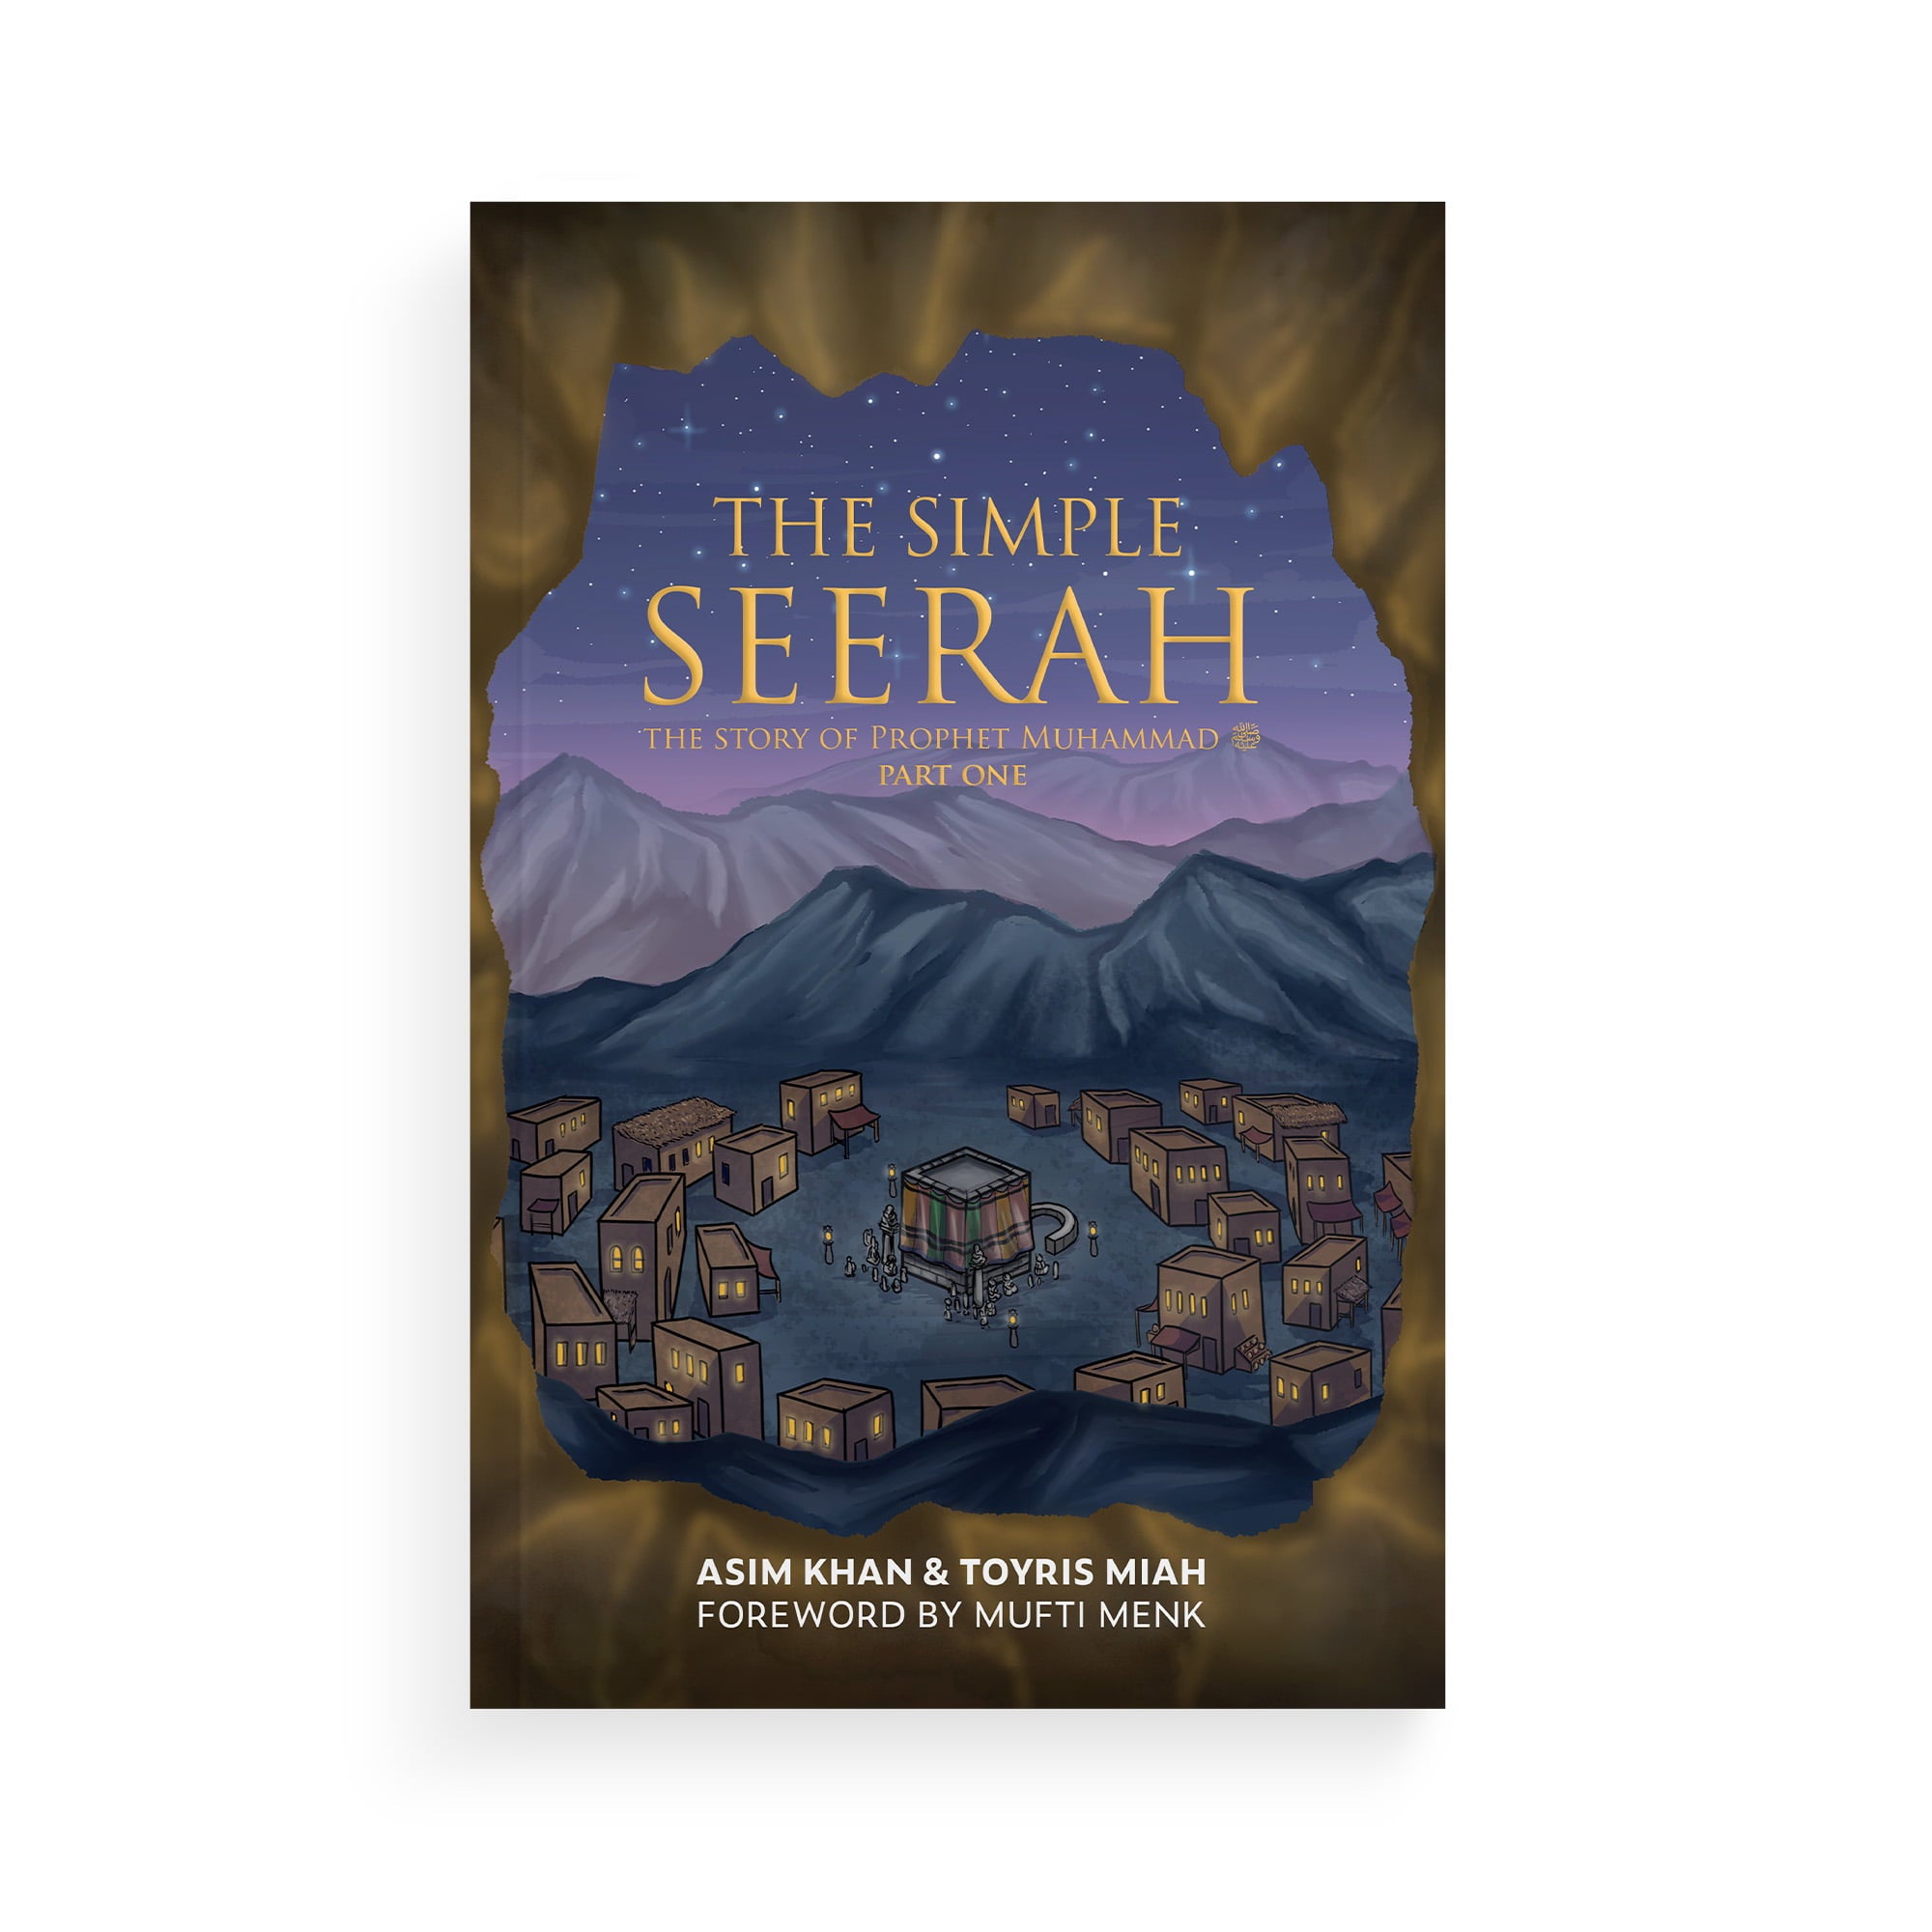 The Simple Seerah: The Story of Prophet Muhammad (s.a.w.) — Part One